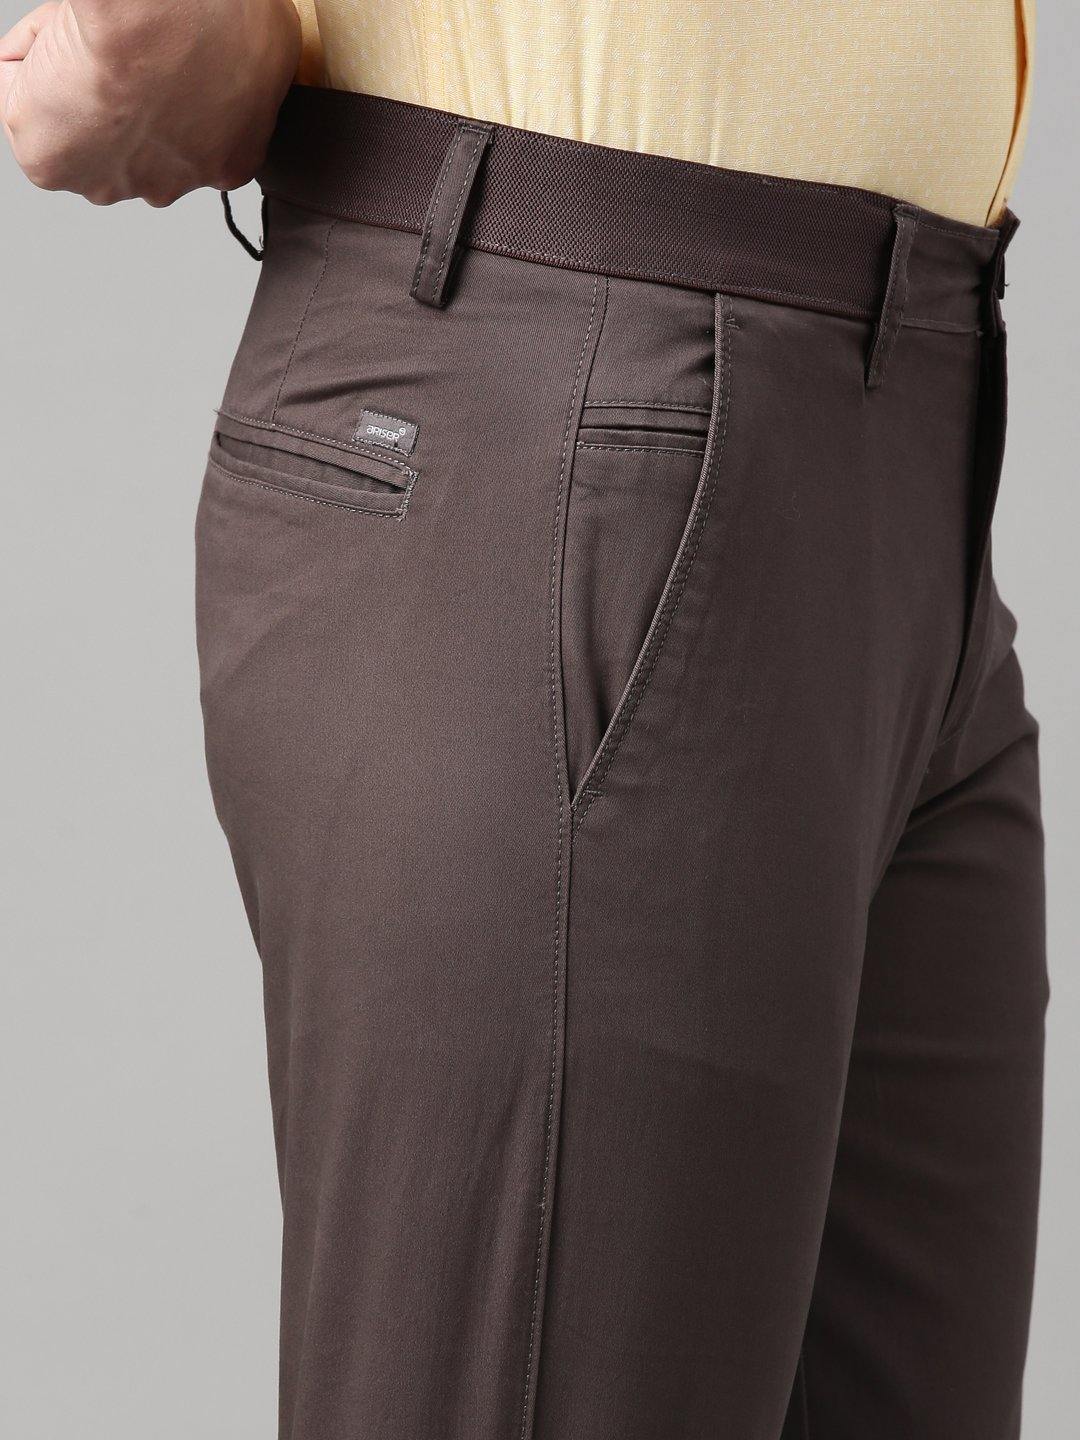 Stretchable Slim Fit Trousers Cotton Pant with Elasticated Back Belt and  Side Pocket Slim Fitting Full